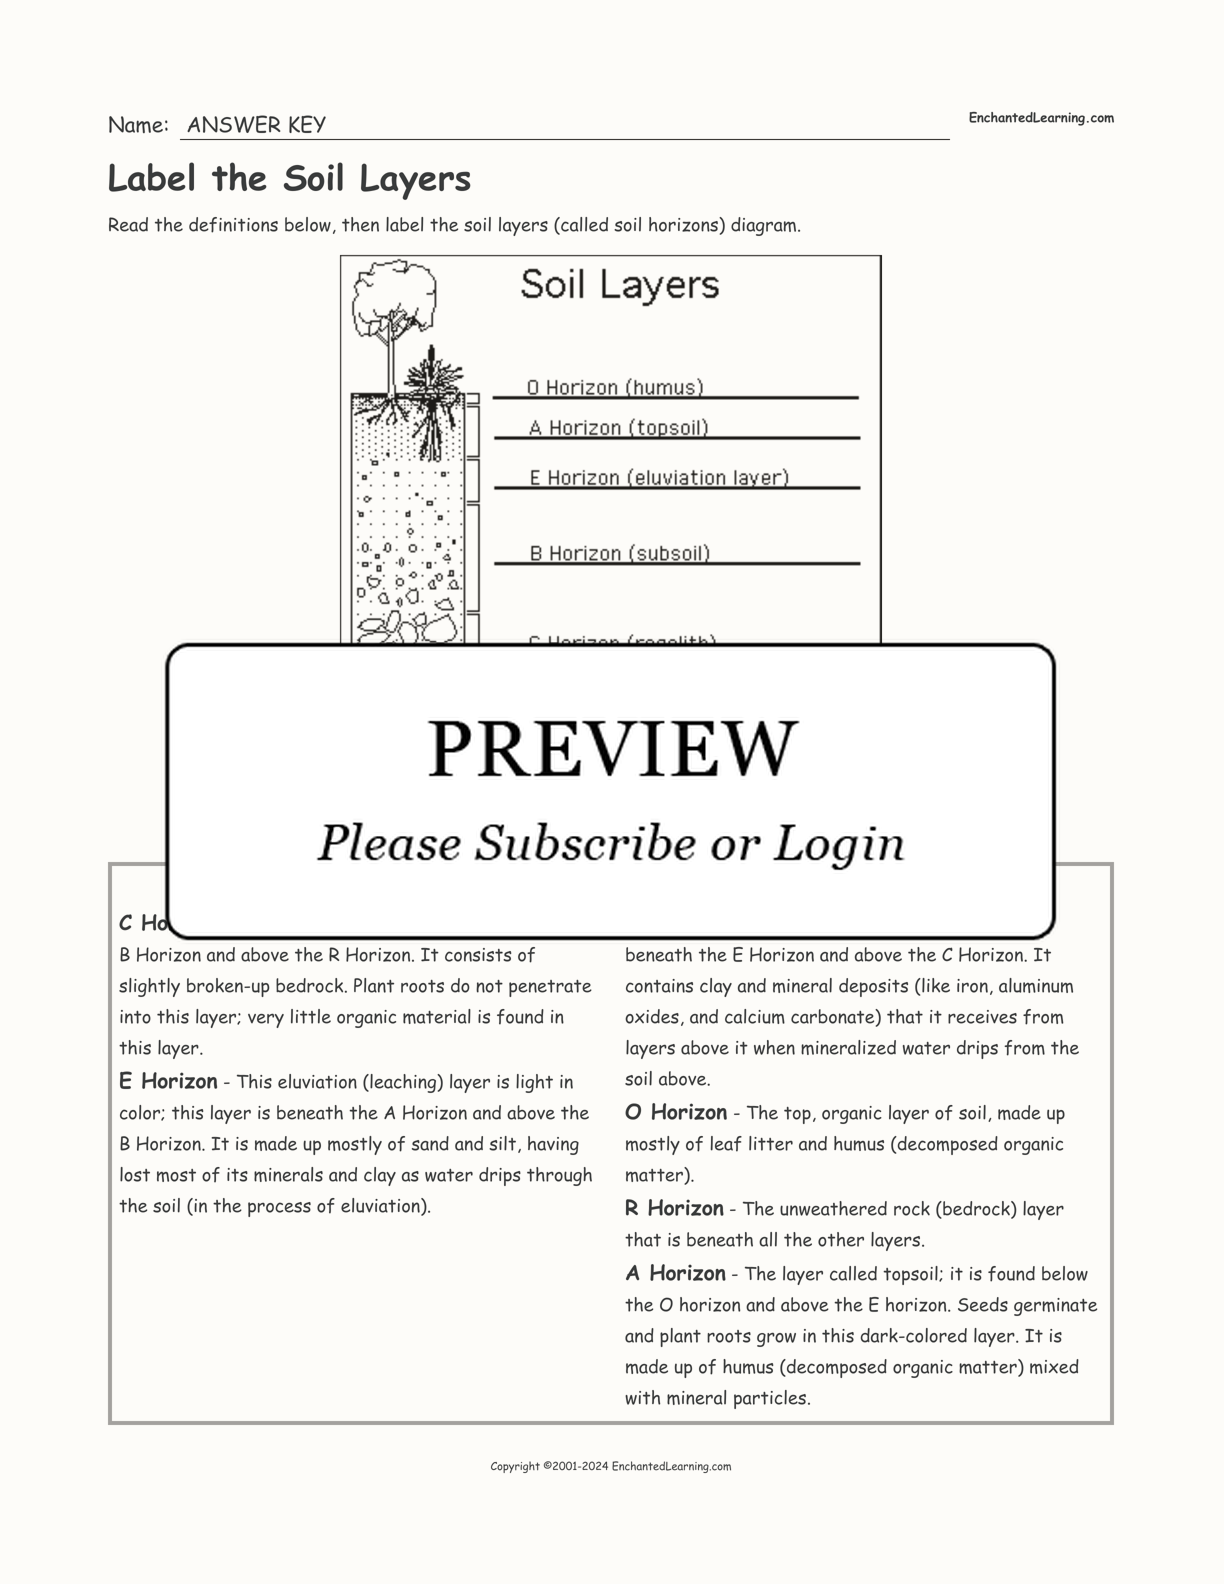 Label the Soil Layers interactive worksheet page 2